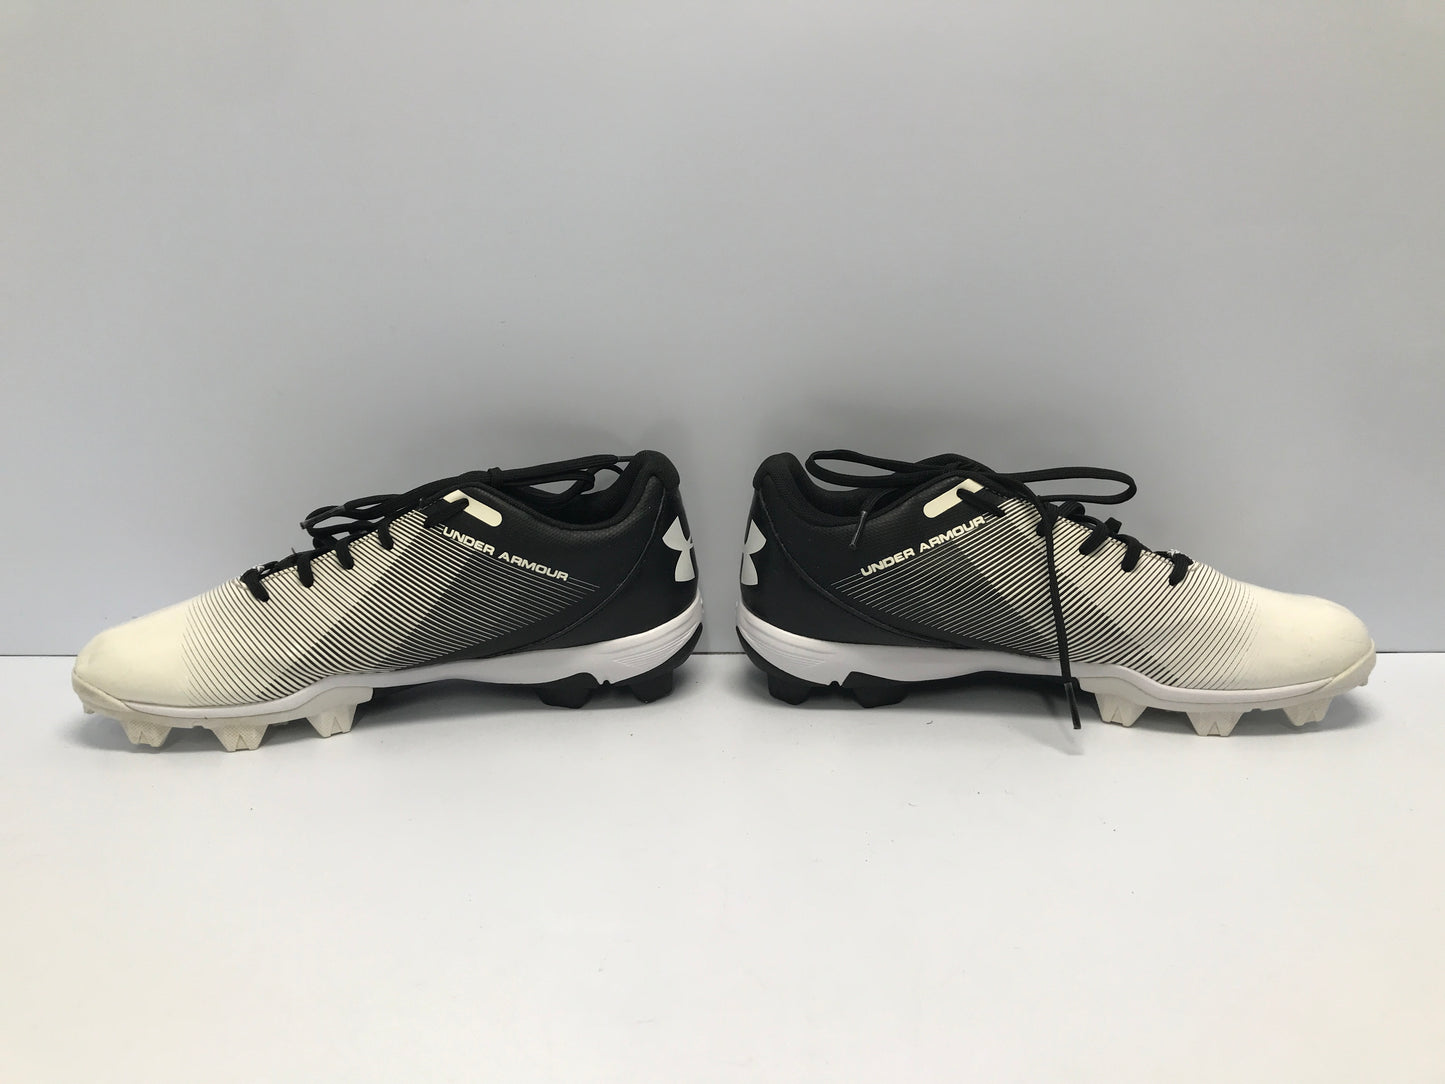 Baseball Shoes Cleats Men's Size 9.5 Under Armour Black White Like New